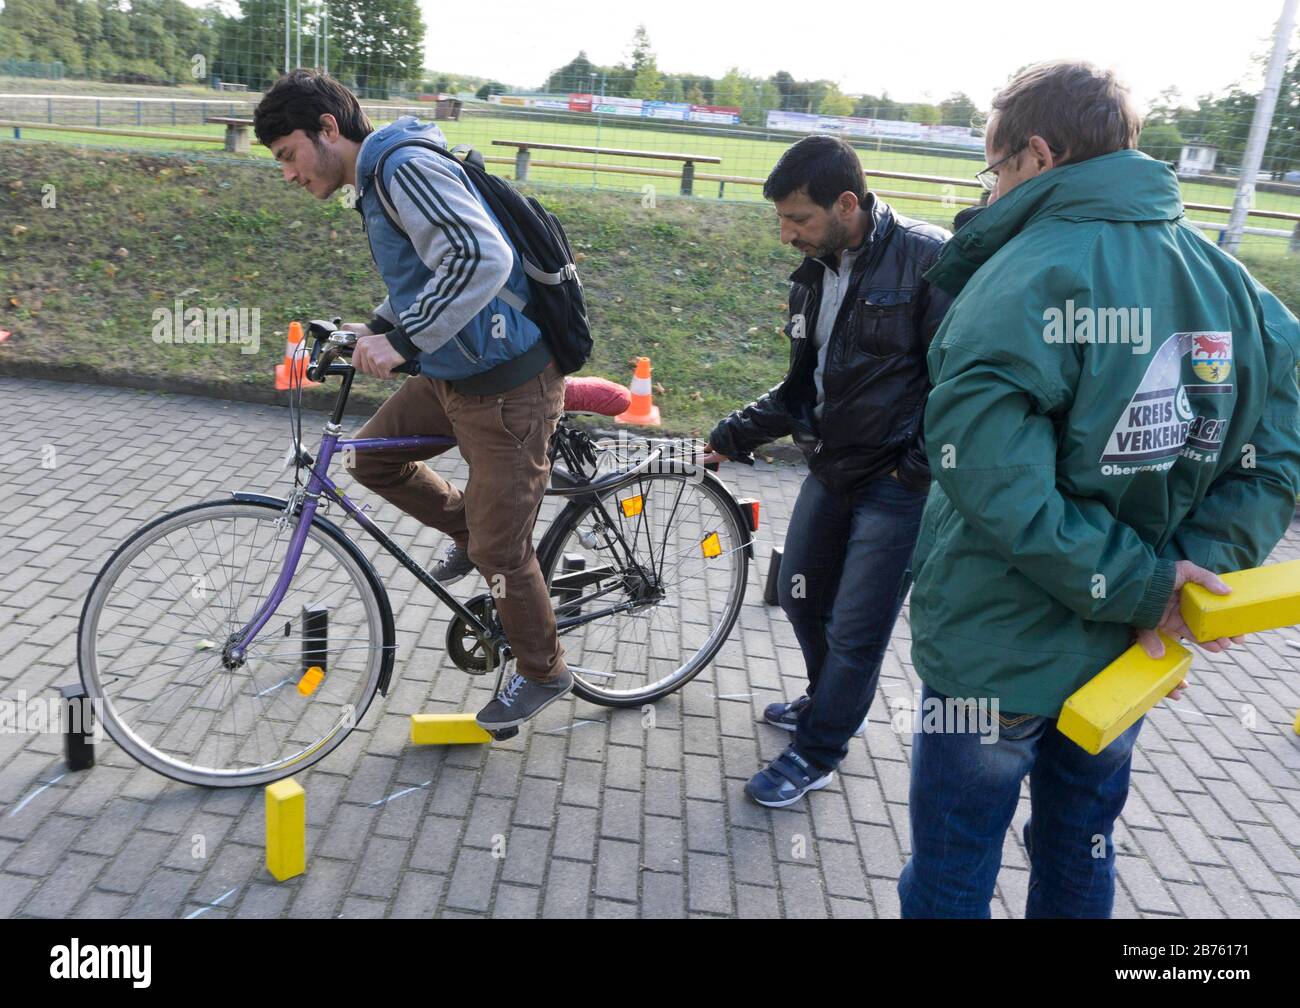 Syrian refugees will learn traffic rules and cycling during an integration course, on 05.10.2016. The Oberspreewald-Lausitz district and traffic guard will show and explain traffic signs and rules to the refugees in the rooms of the Grossraeschen sports club. [automated translation] Stock Photo